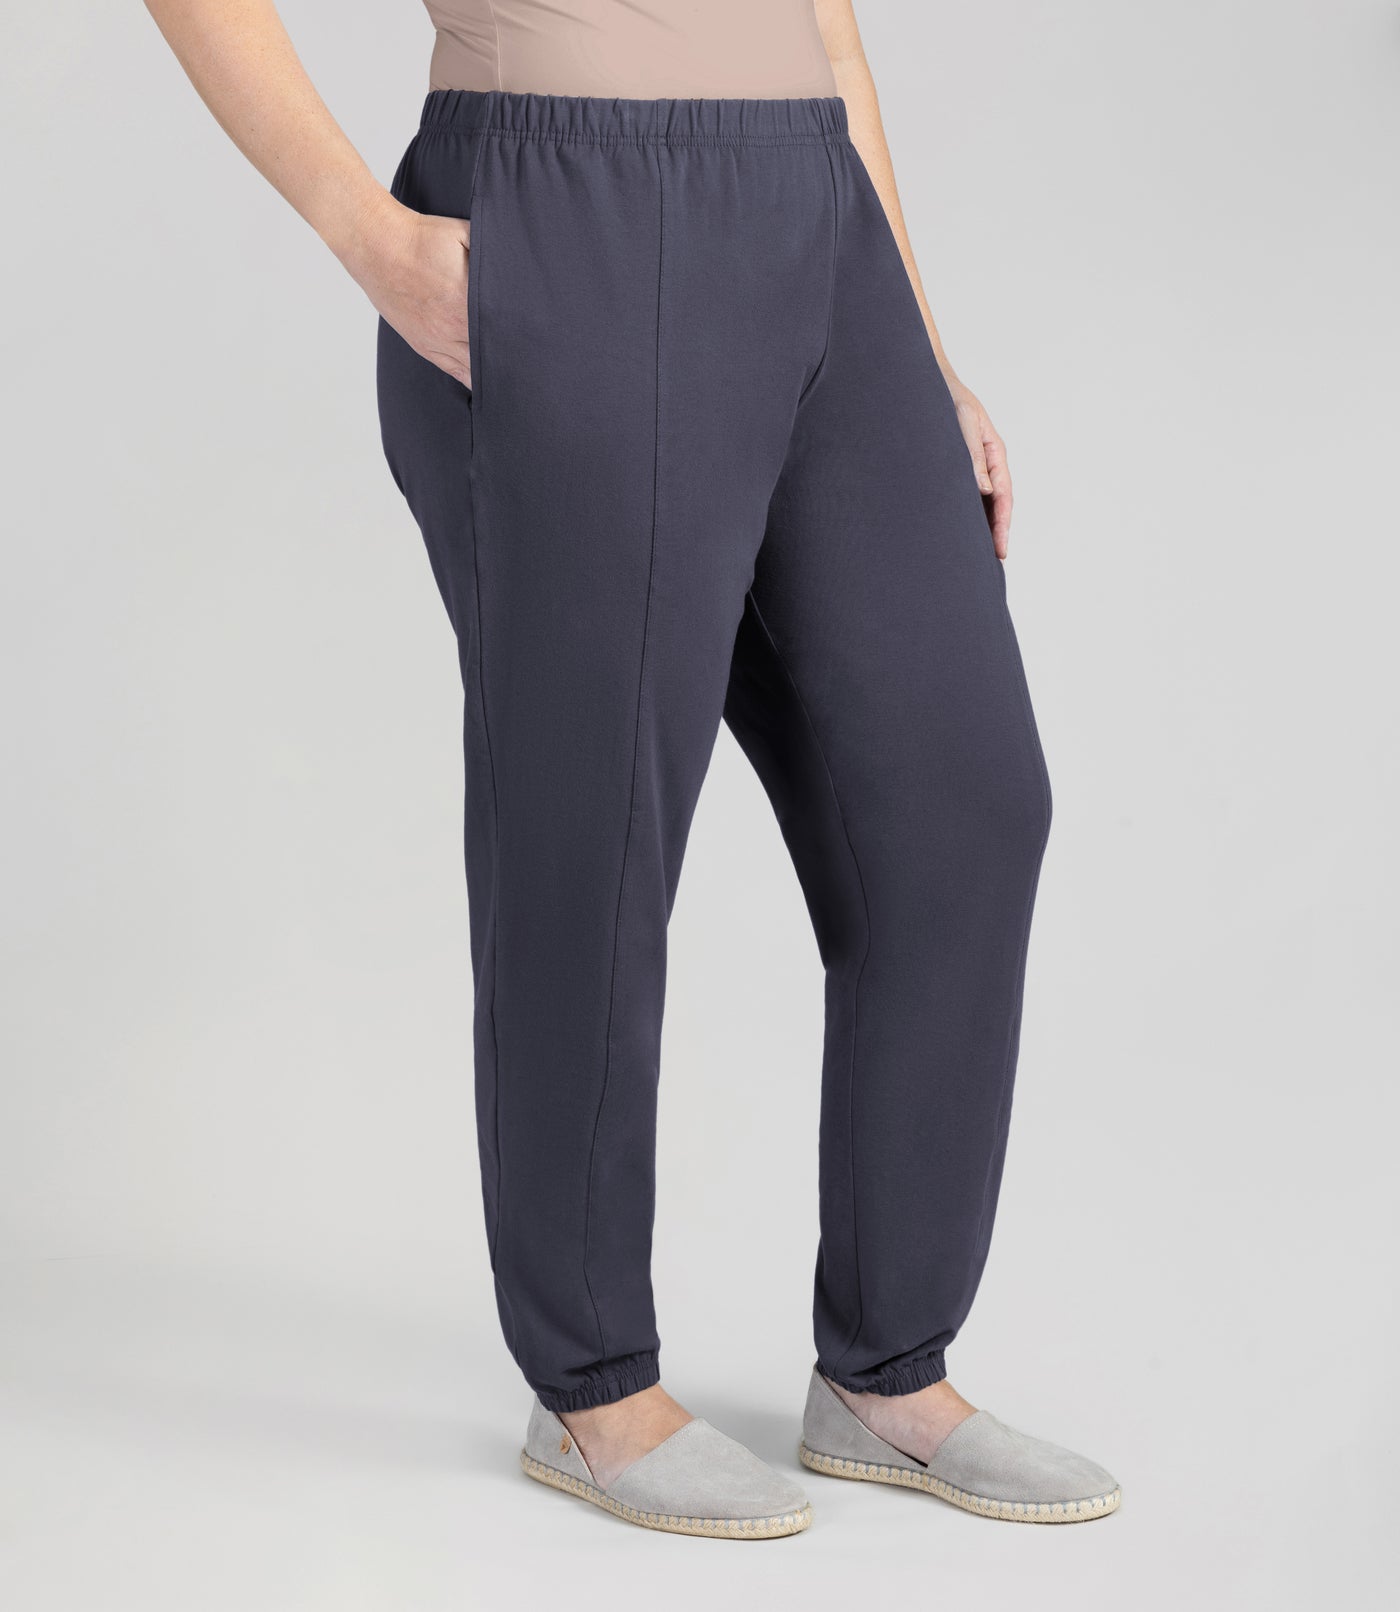 Bottom half of plus sized woman, front view, wearing junoactives stretch naturals jogger pockets oak gray. The pants are full length and have pockets on each side.